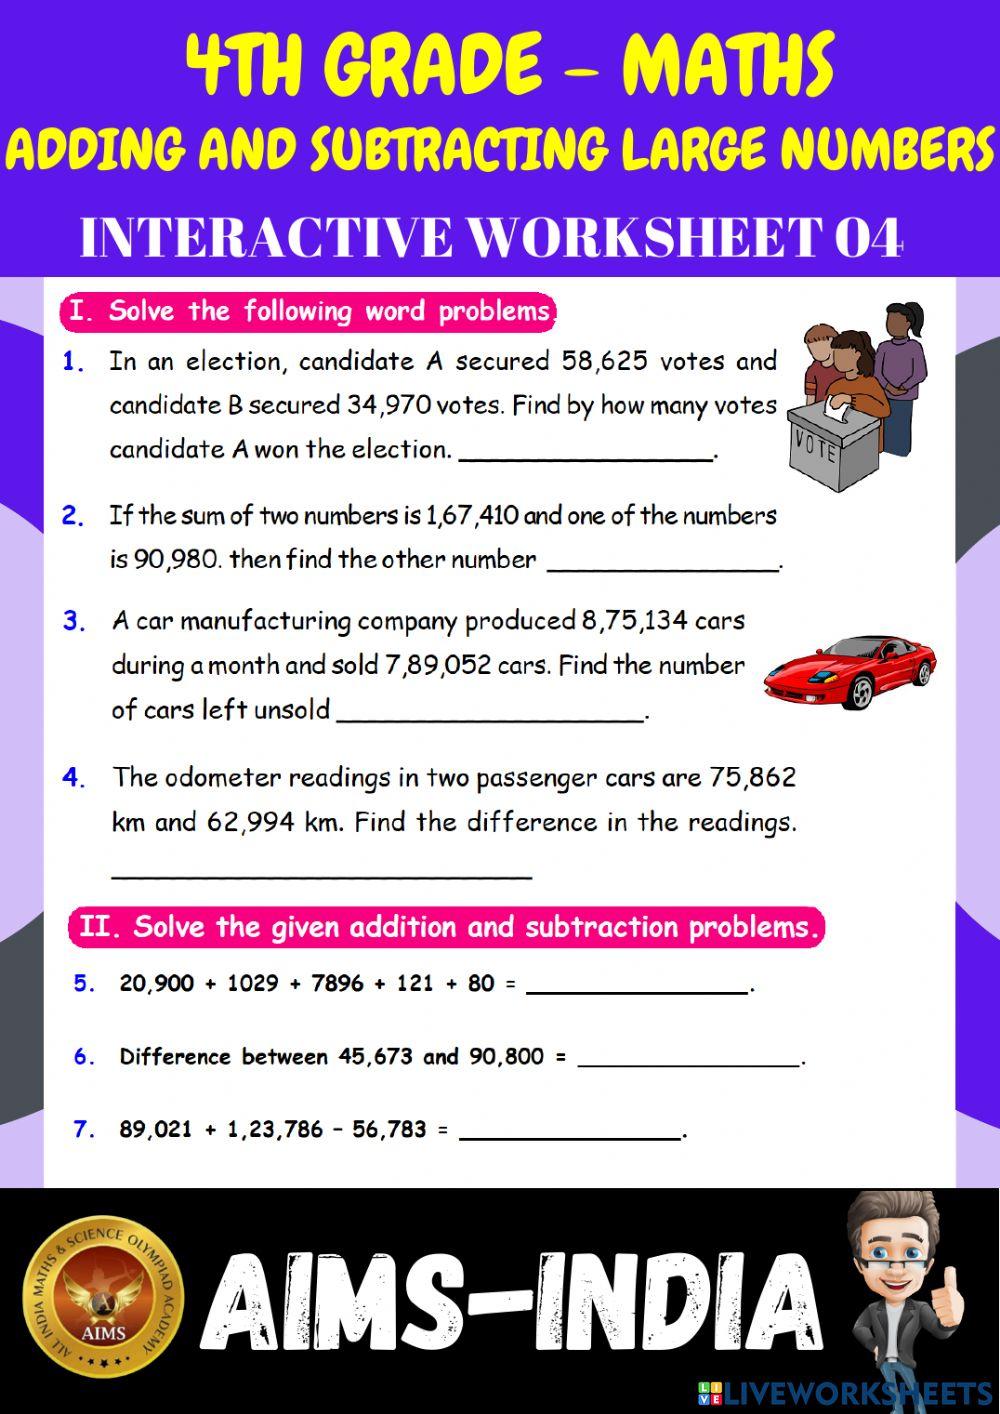 4th-maths-ps04-adding and subtracting large numbers - ch 02